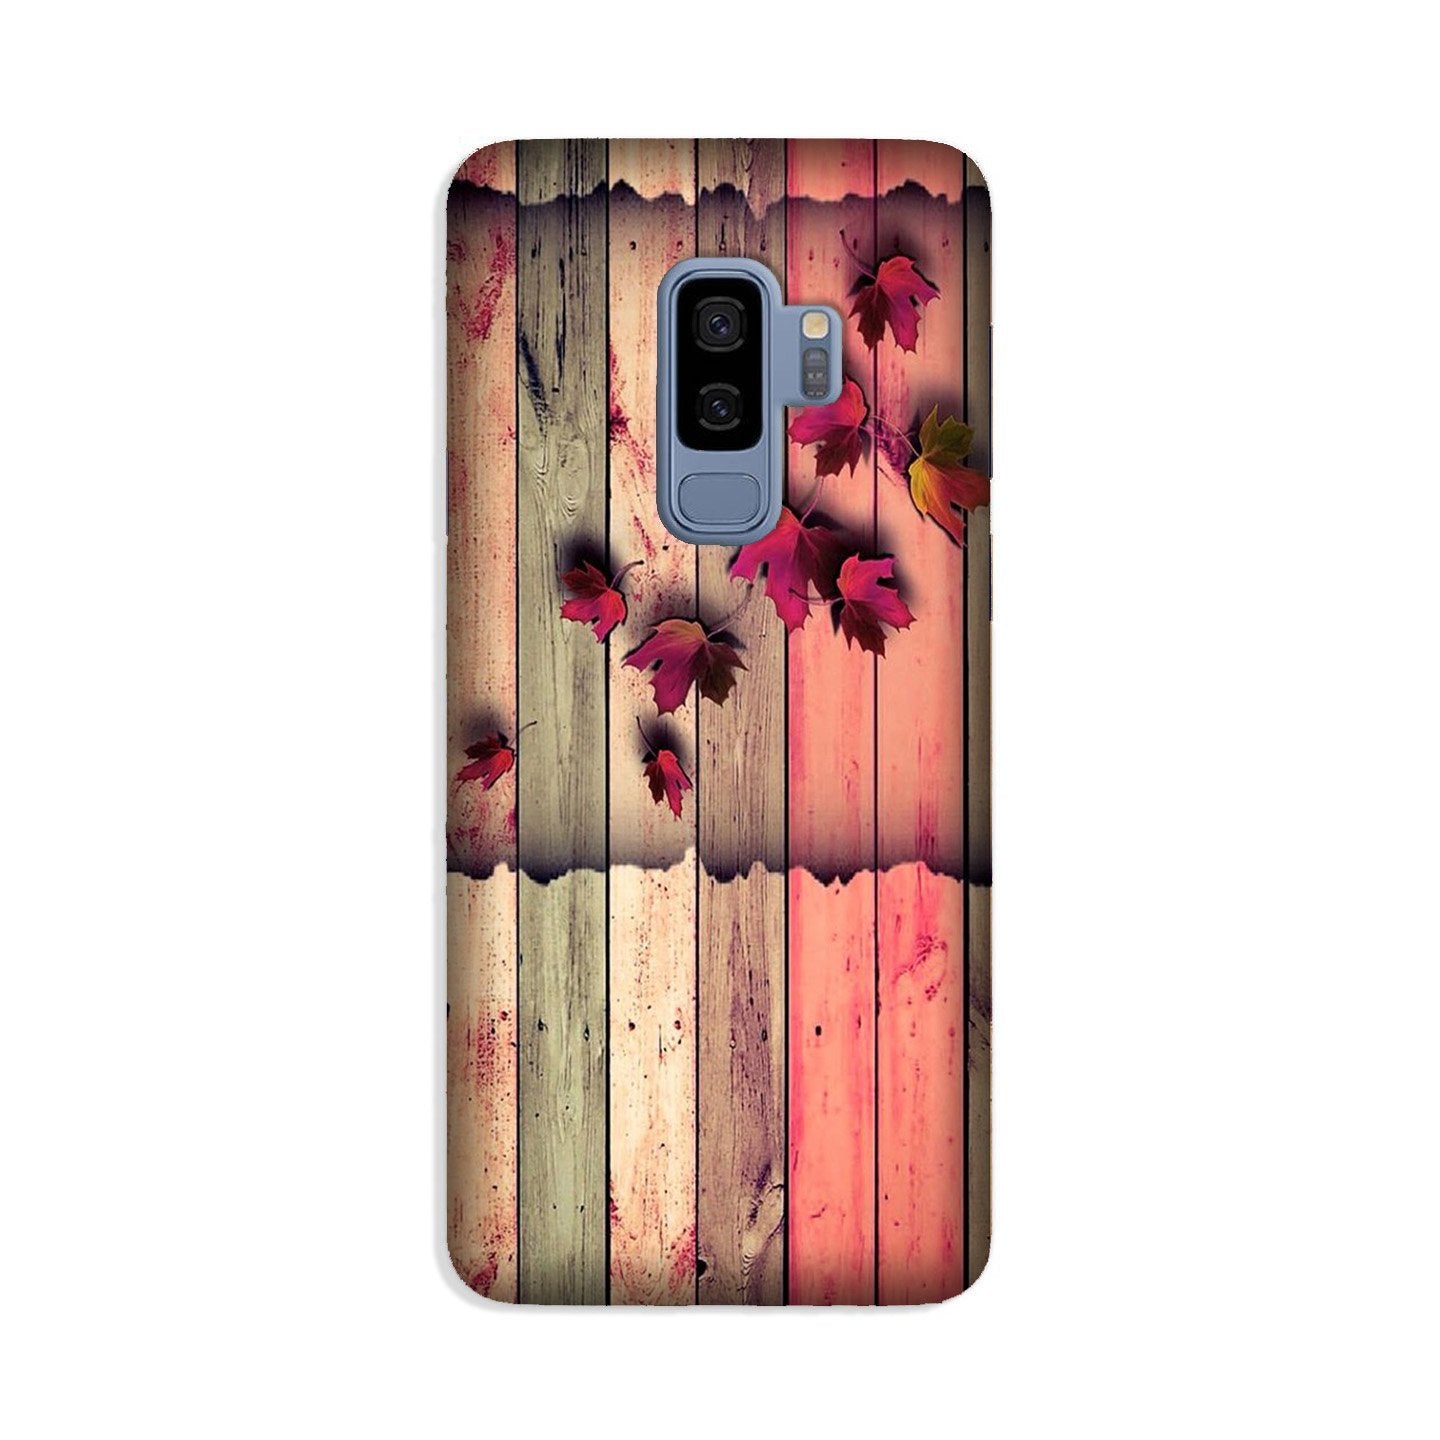 Wooden look2 Case for Galaxy S9 Plus